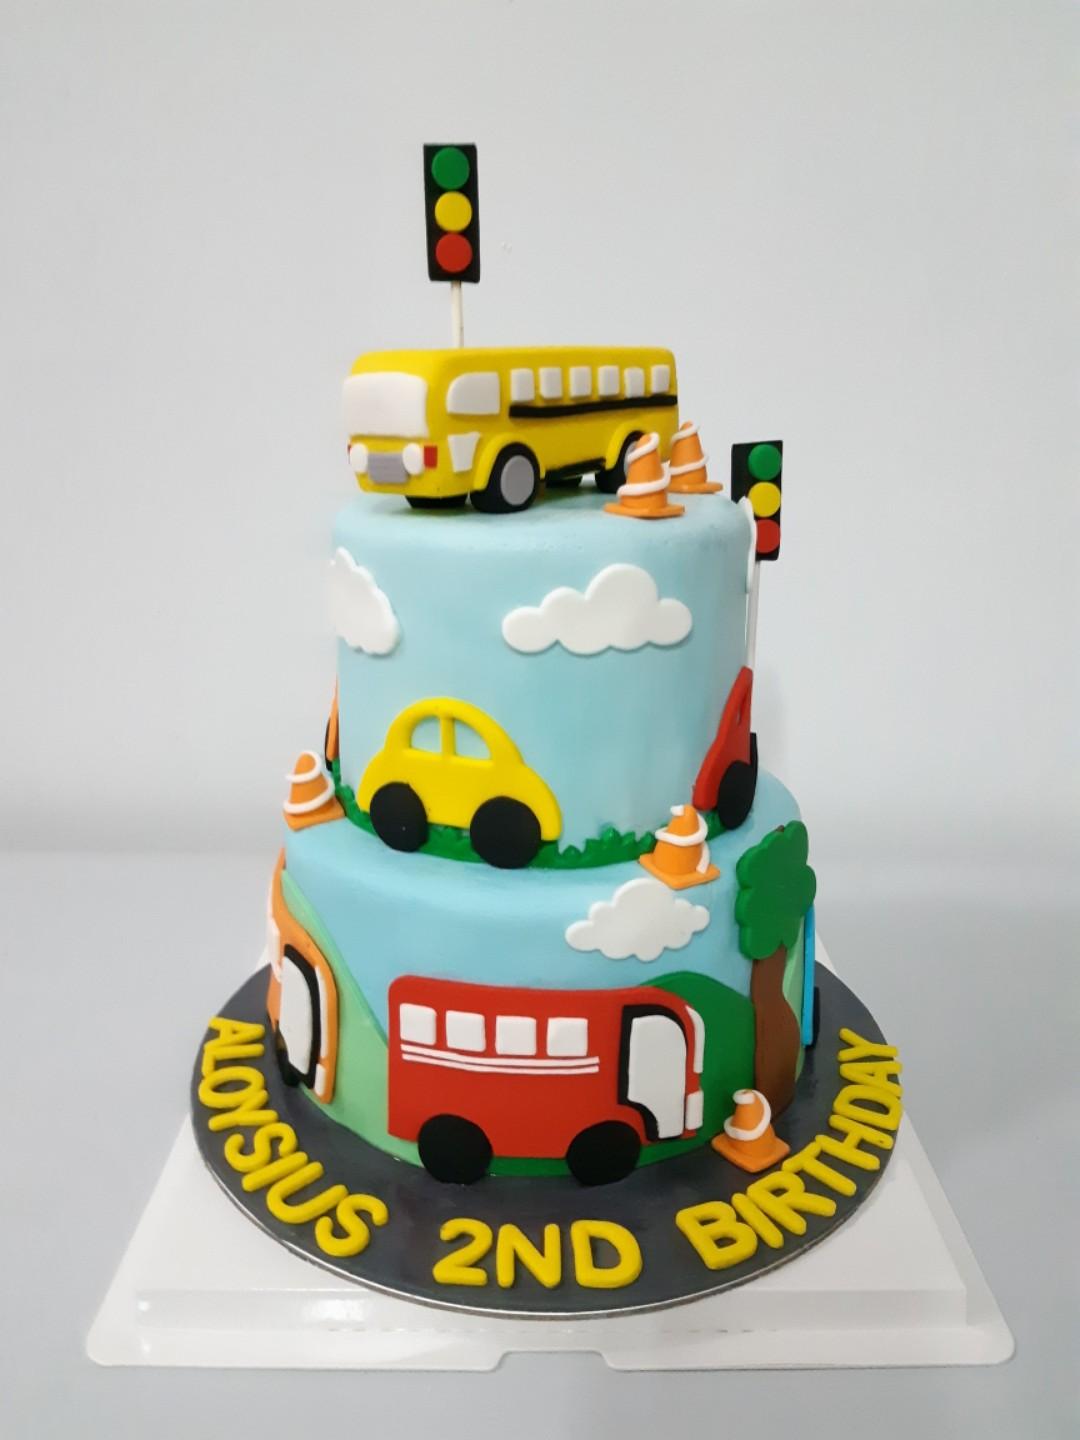 Big Red Bus Cake - Your Treats Bakery